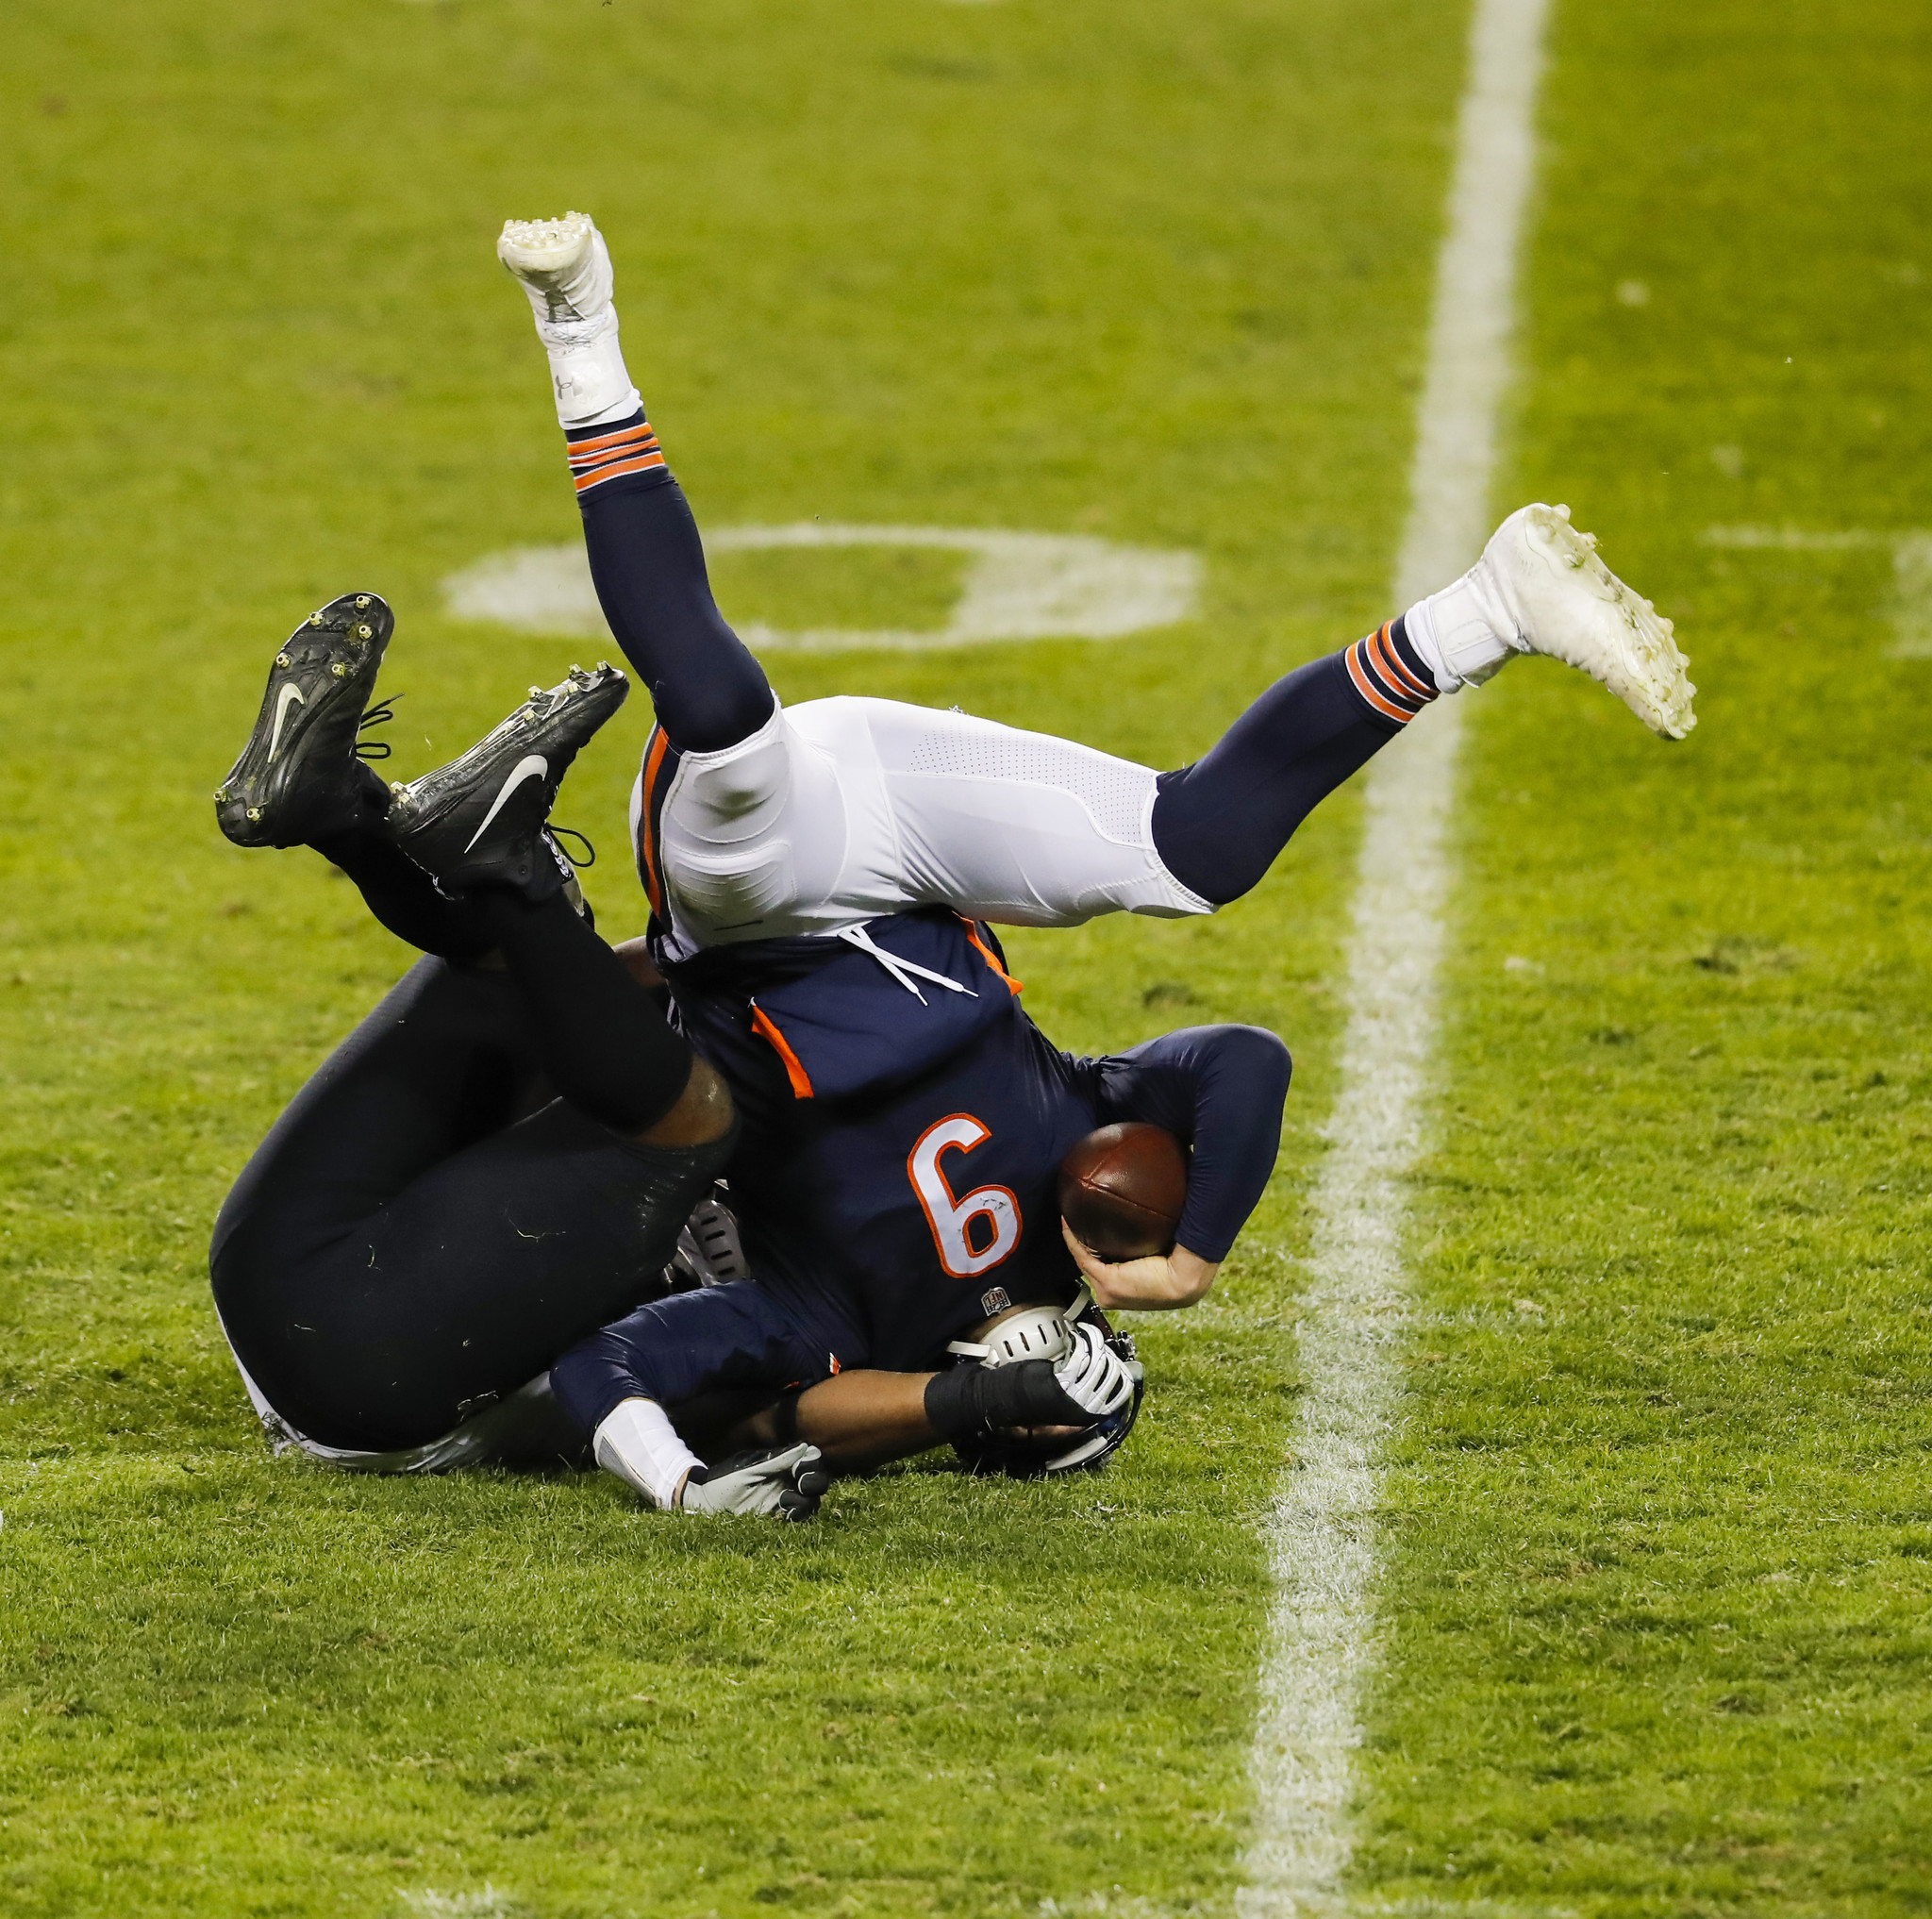 Bears WR Wims suspended 2 games for punching Saints player